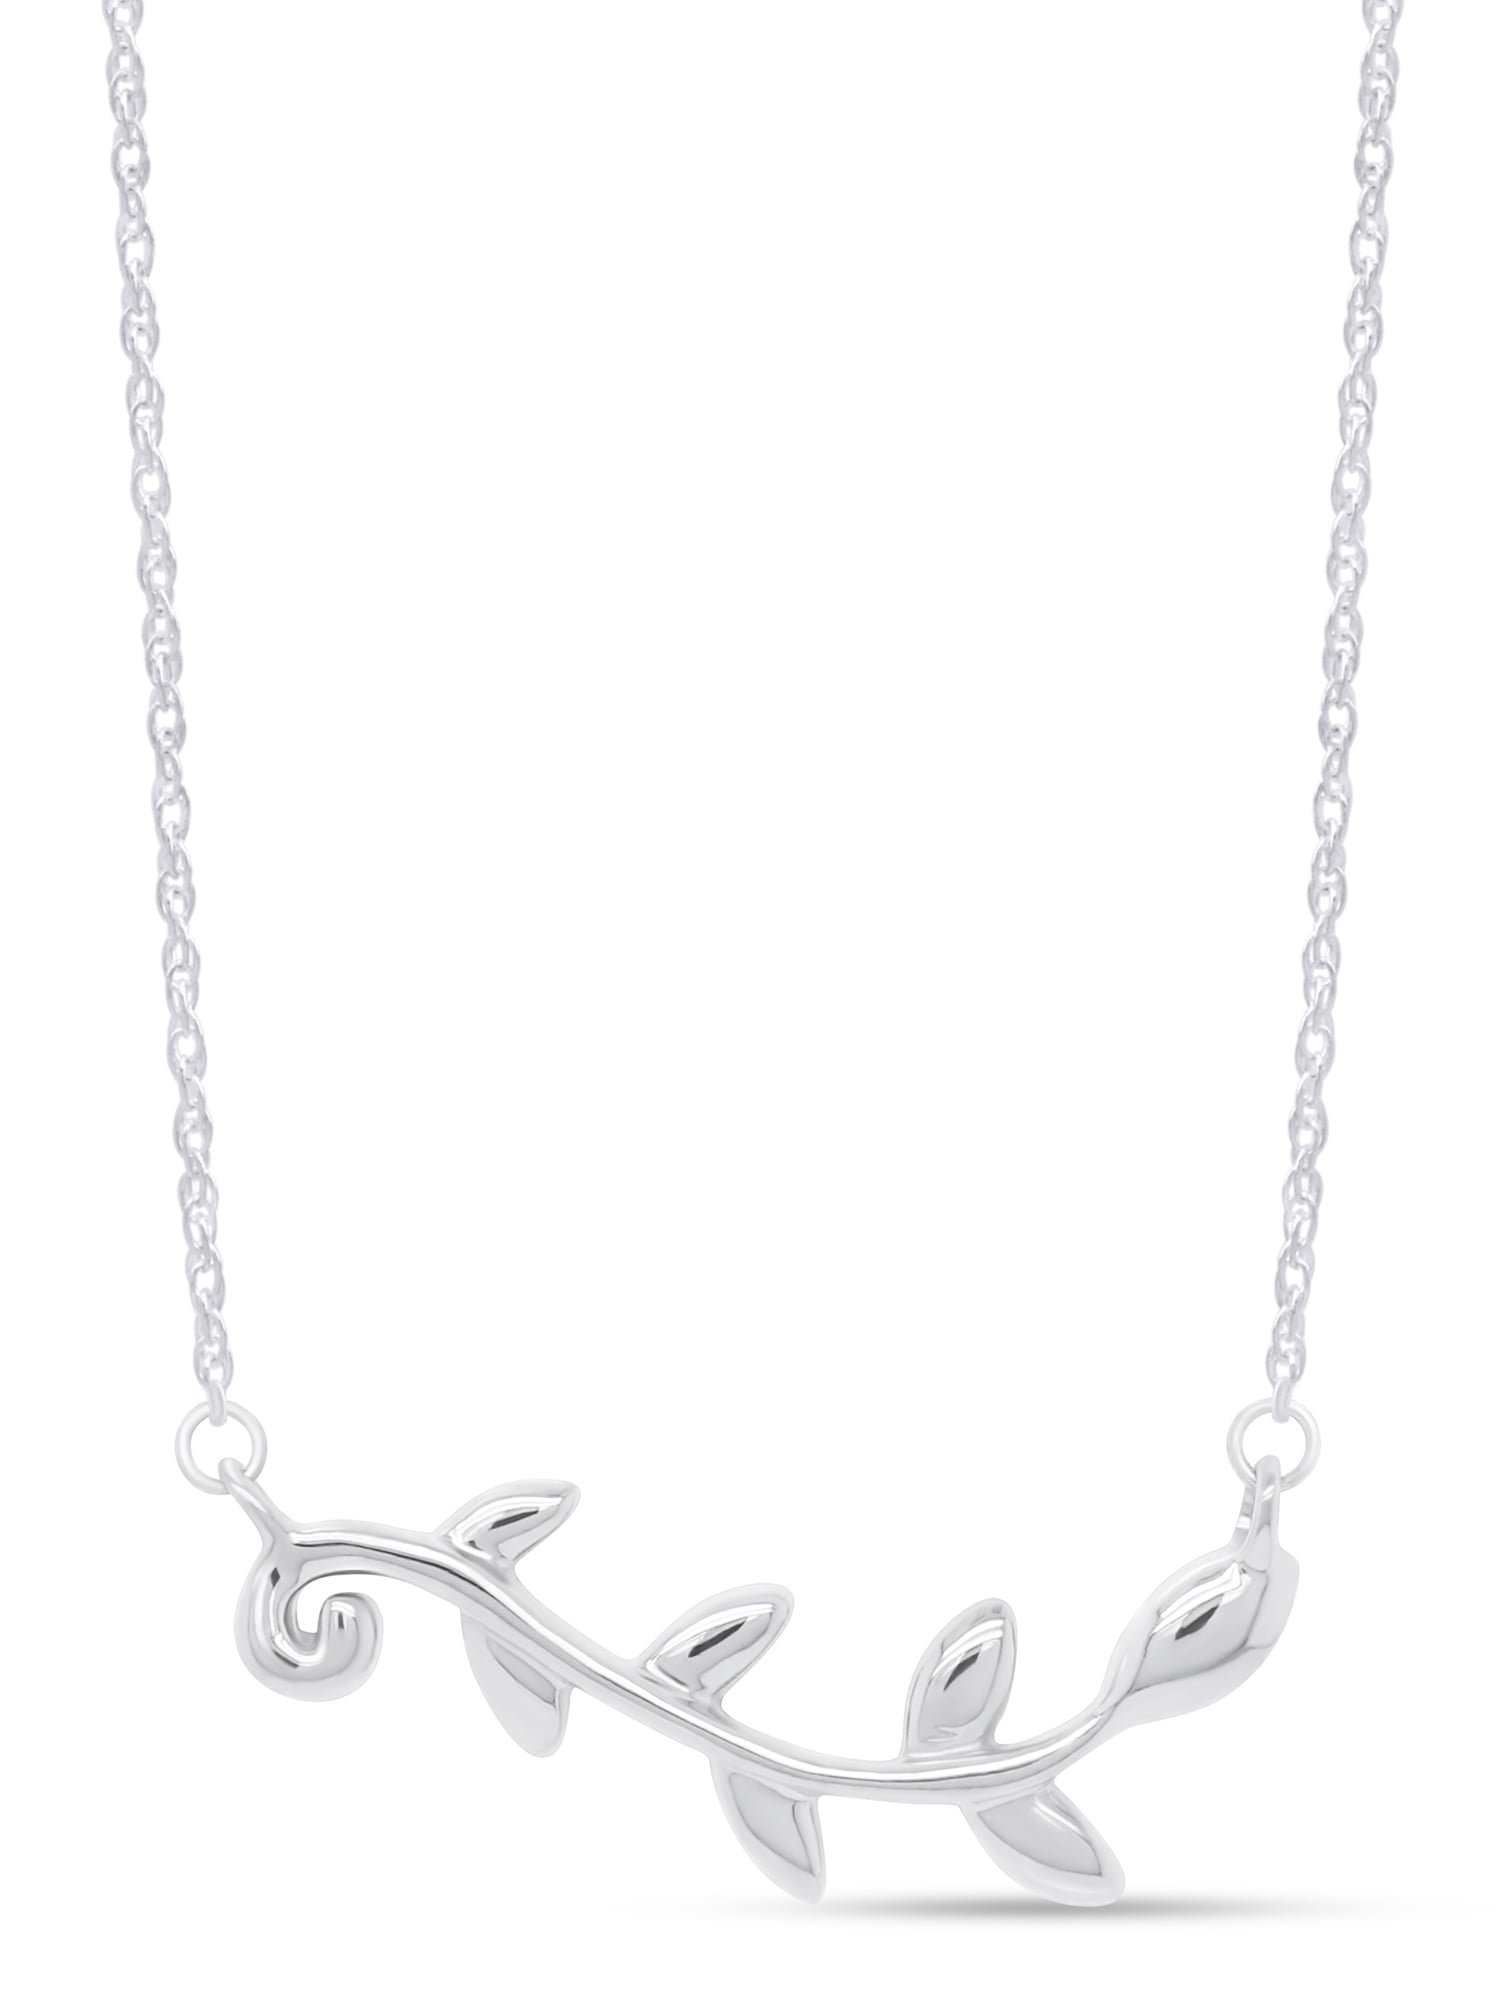 Diamond Dainty Circle Necklace in White Gold, 16